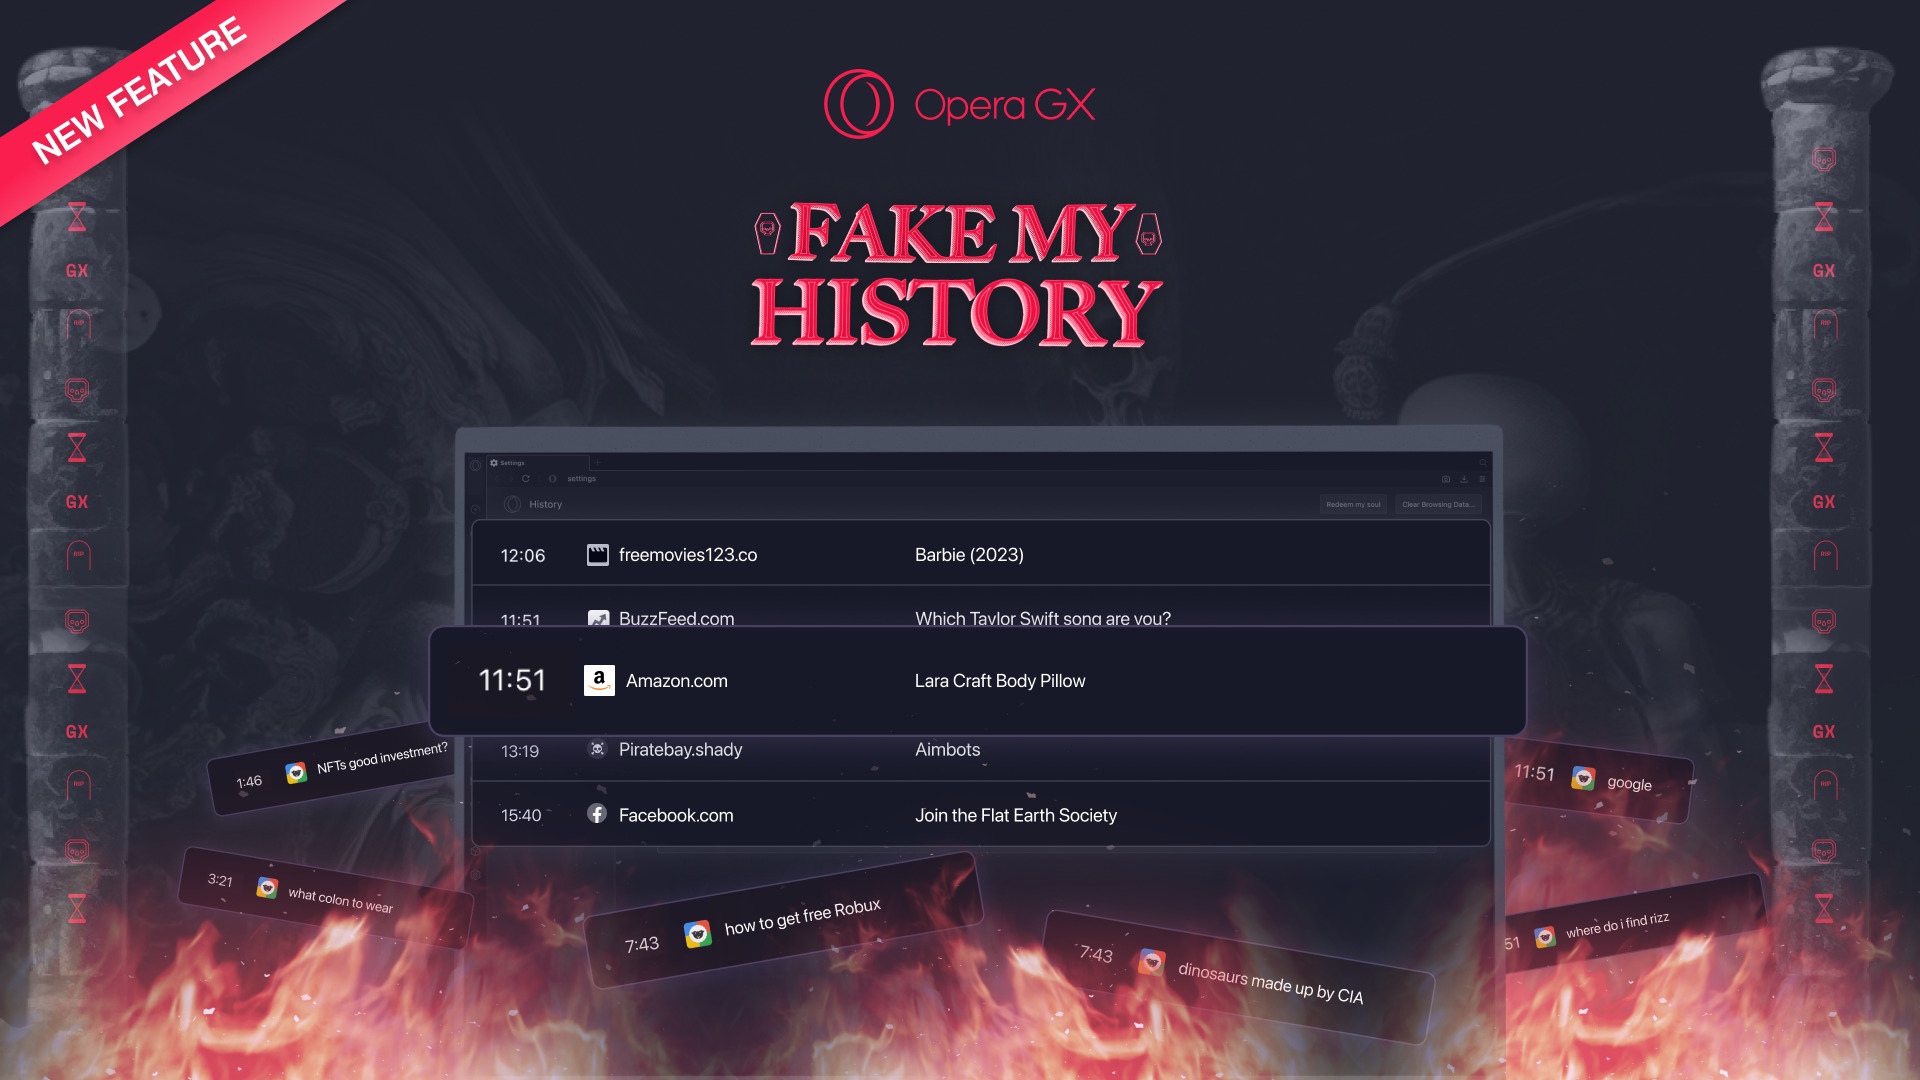 Opera GX offers to get rid of "dirty past" and clean up history in case of user's death